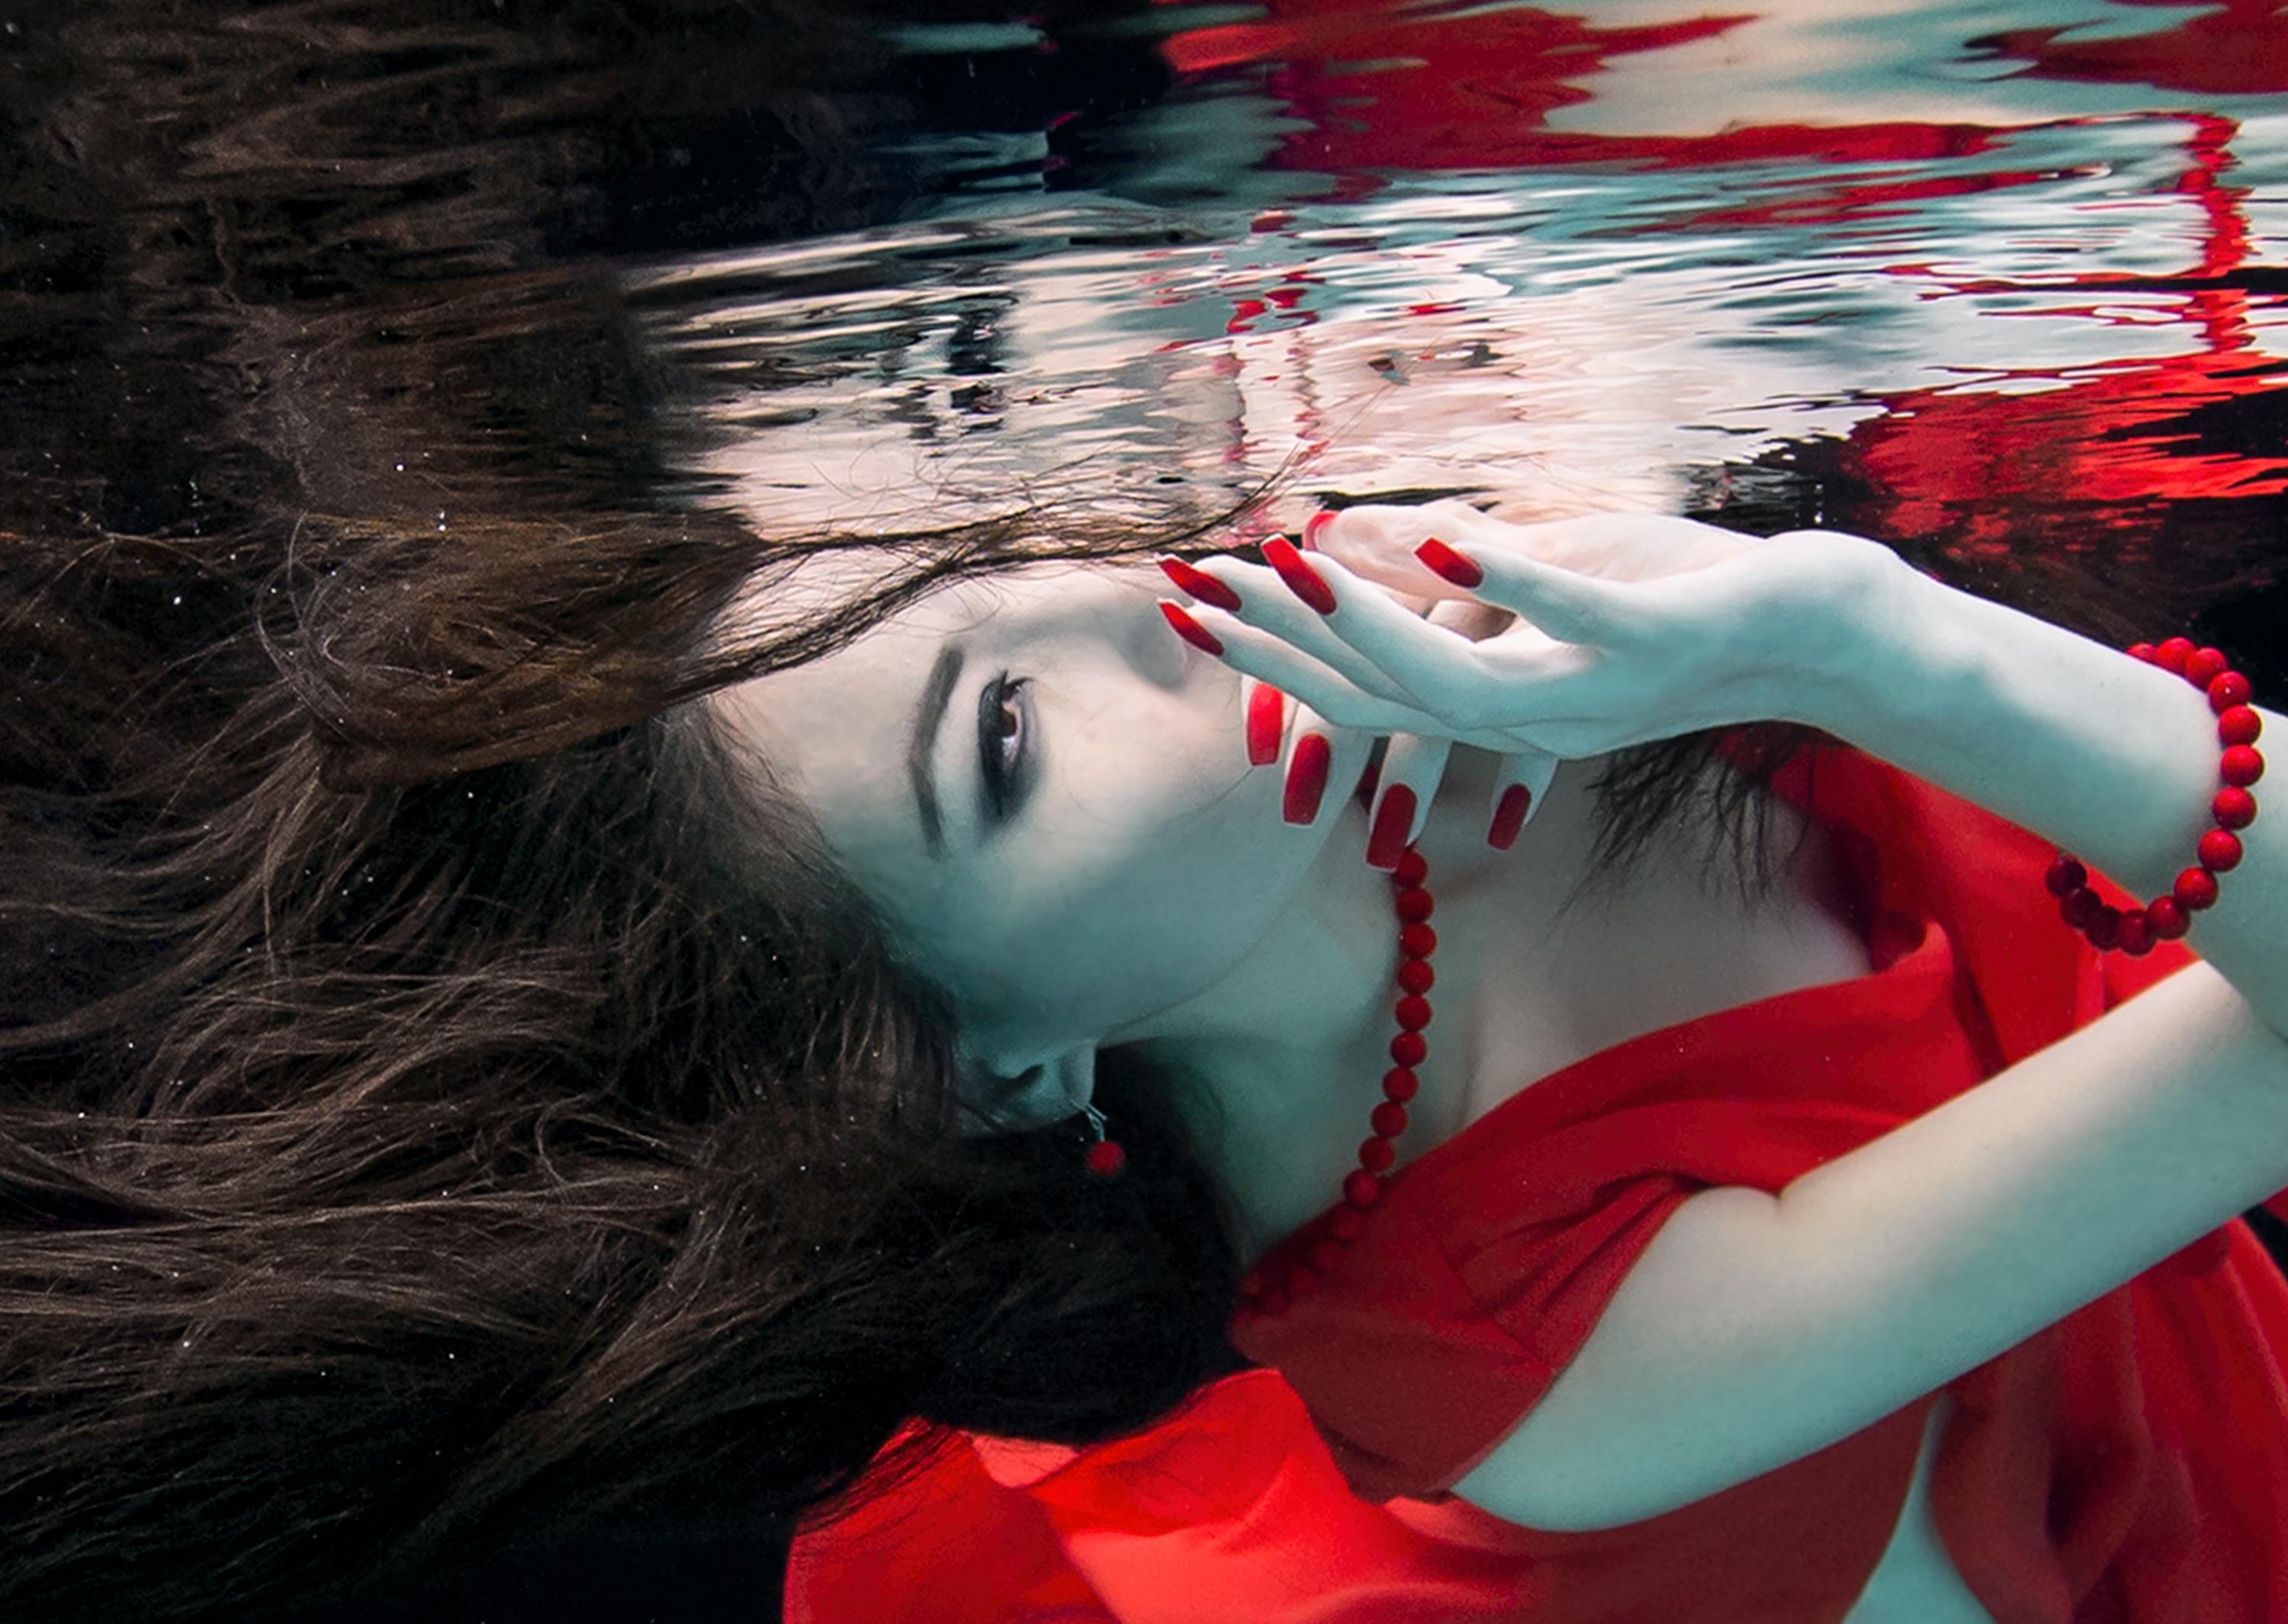 Underwater photograph of a gorgeous girl with dark hair in red dress.

Original gallery quality print on archival metallic paper signed by the artist.
Paper size: 24